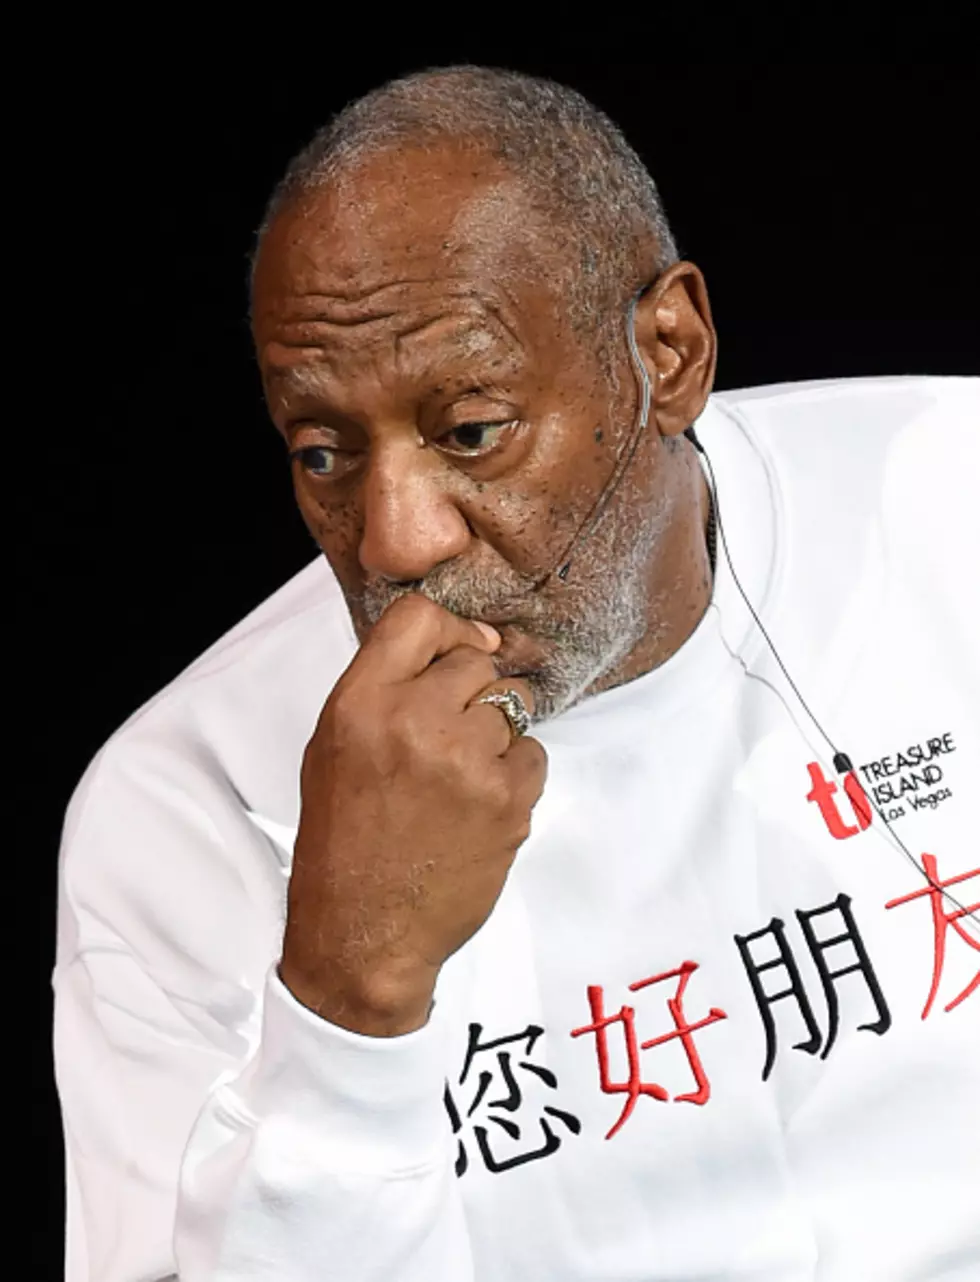 Bill Cosby Addresses Rape Allegations in Uncomfortable AP Interview